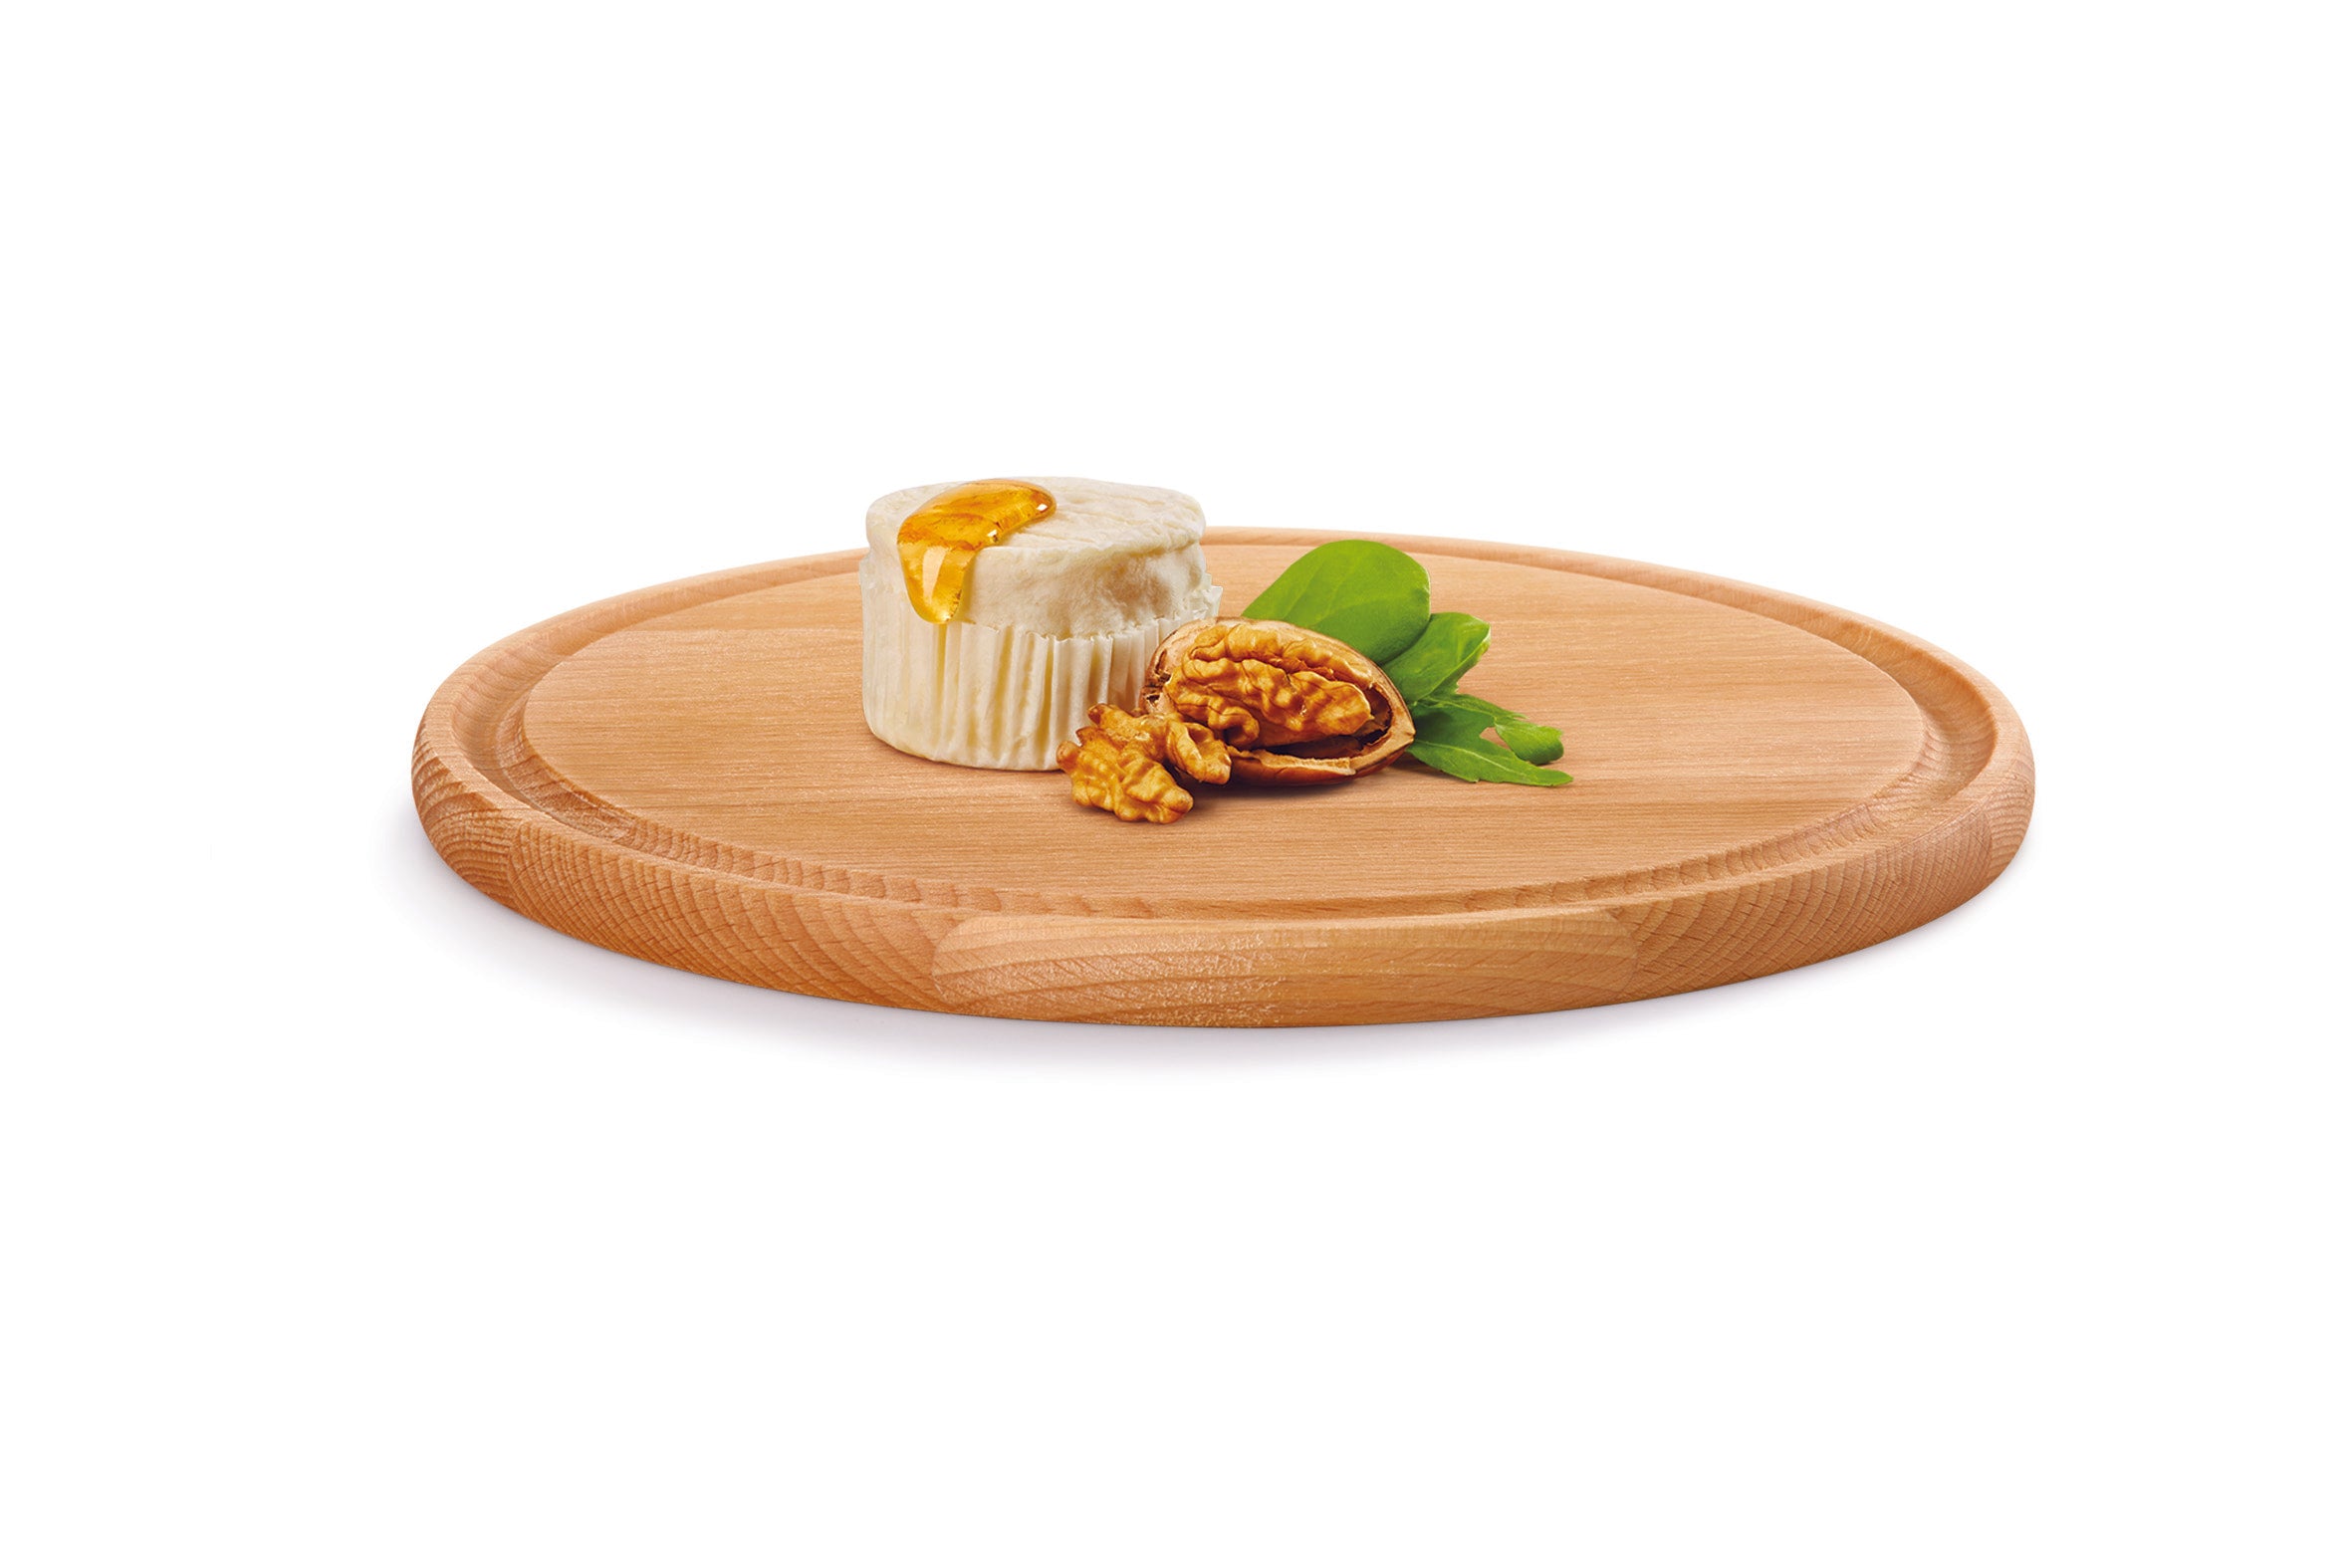 Metaltex Round Wooden Cutting Board, Carded